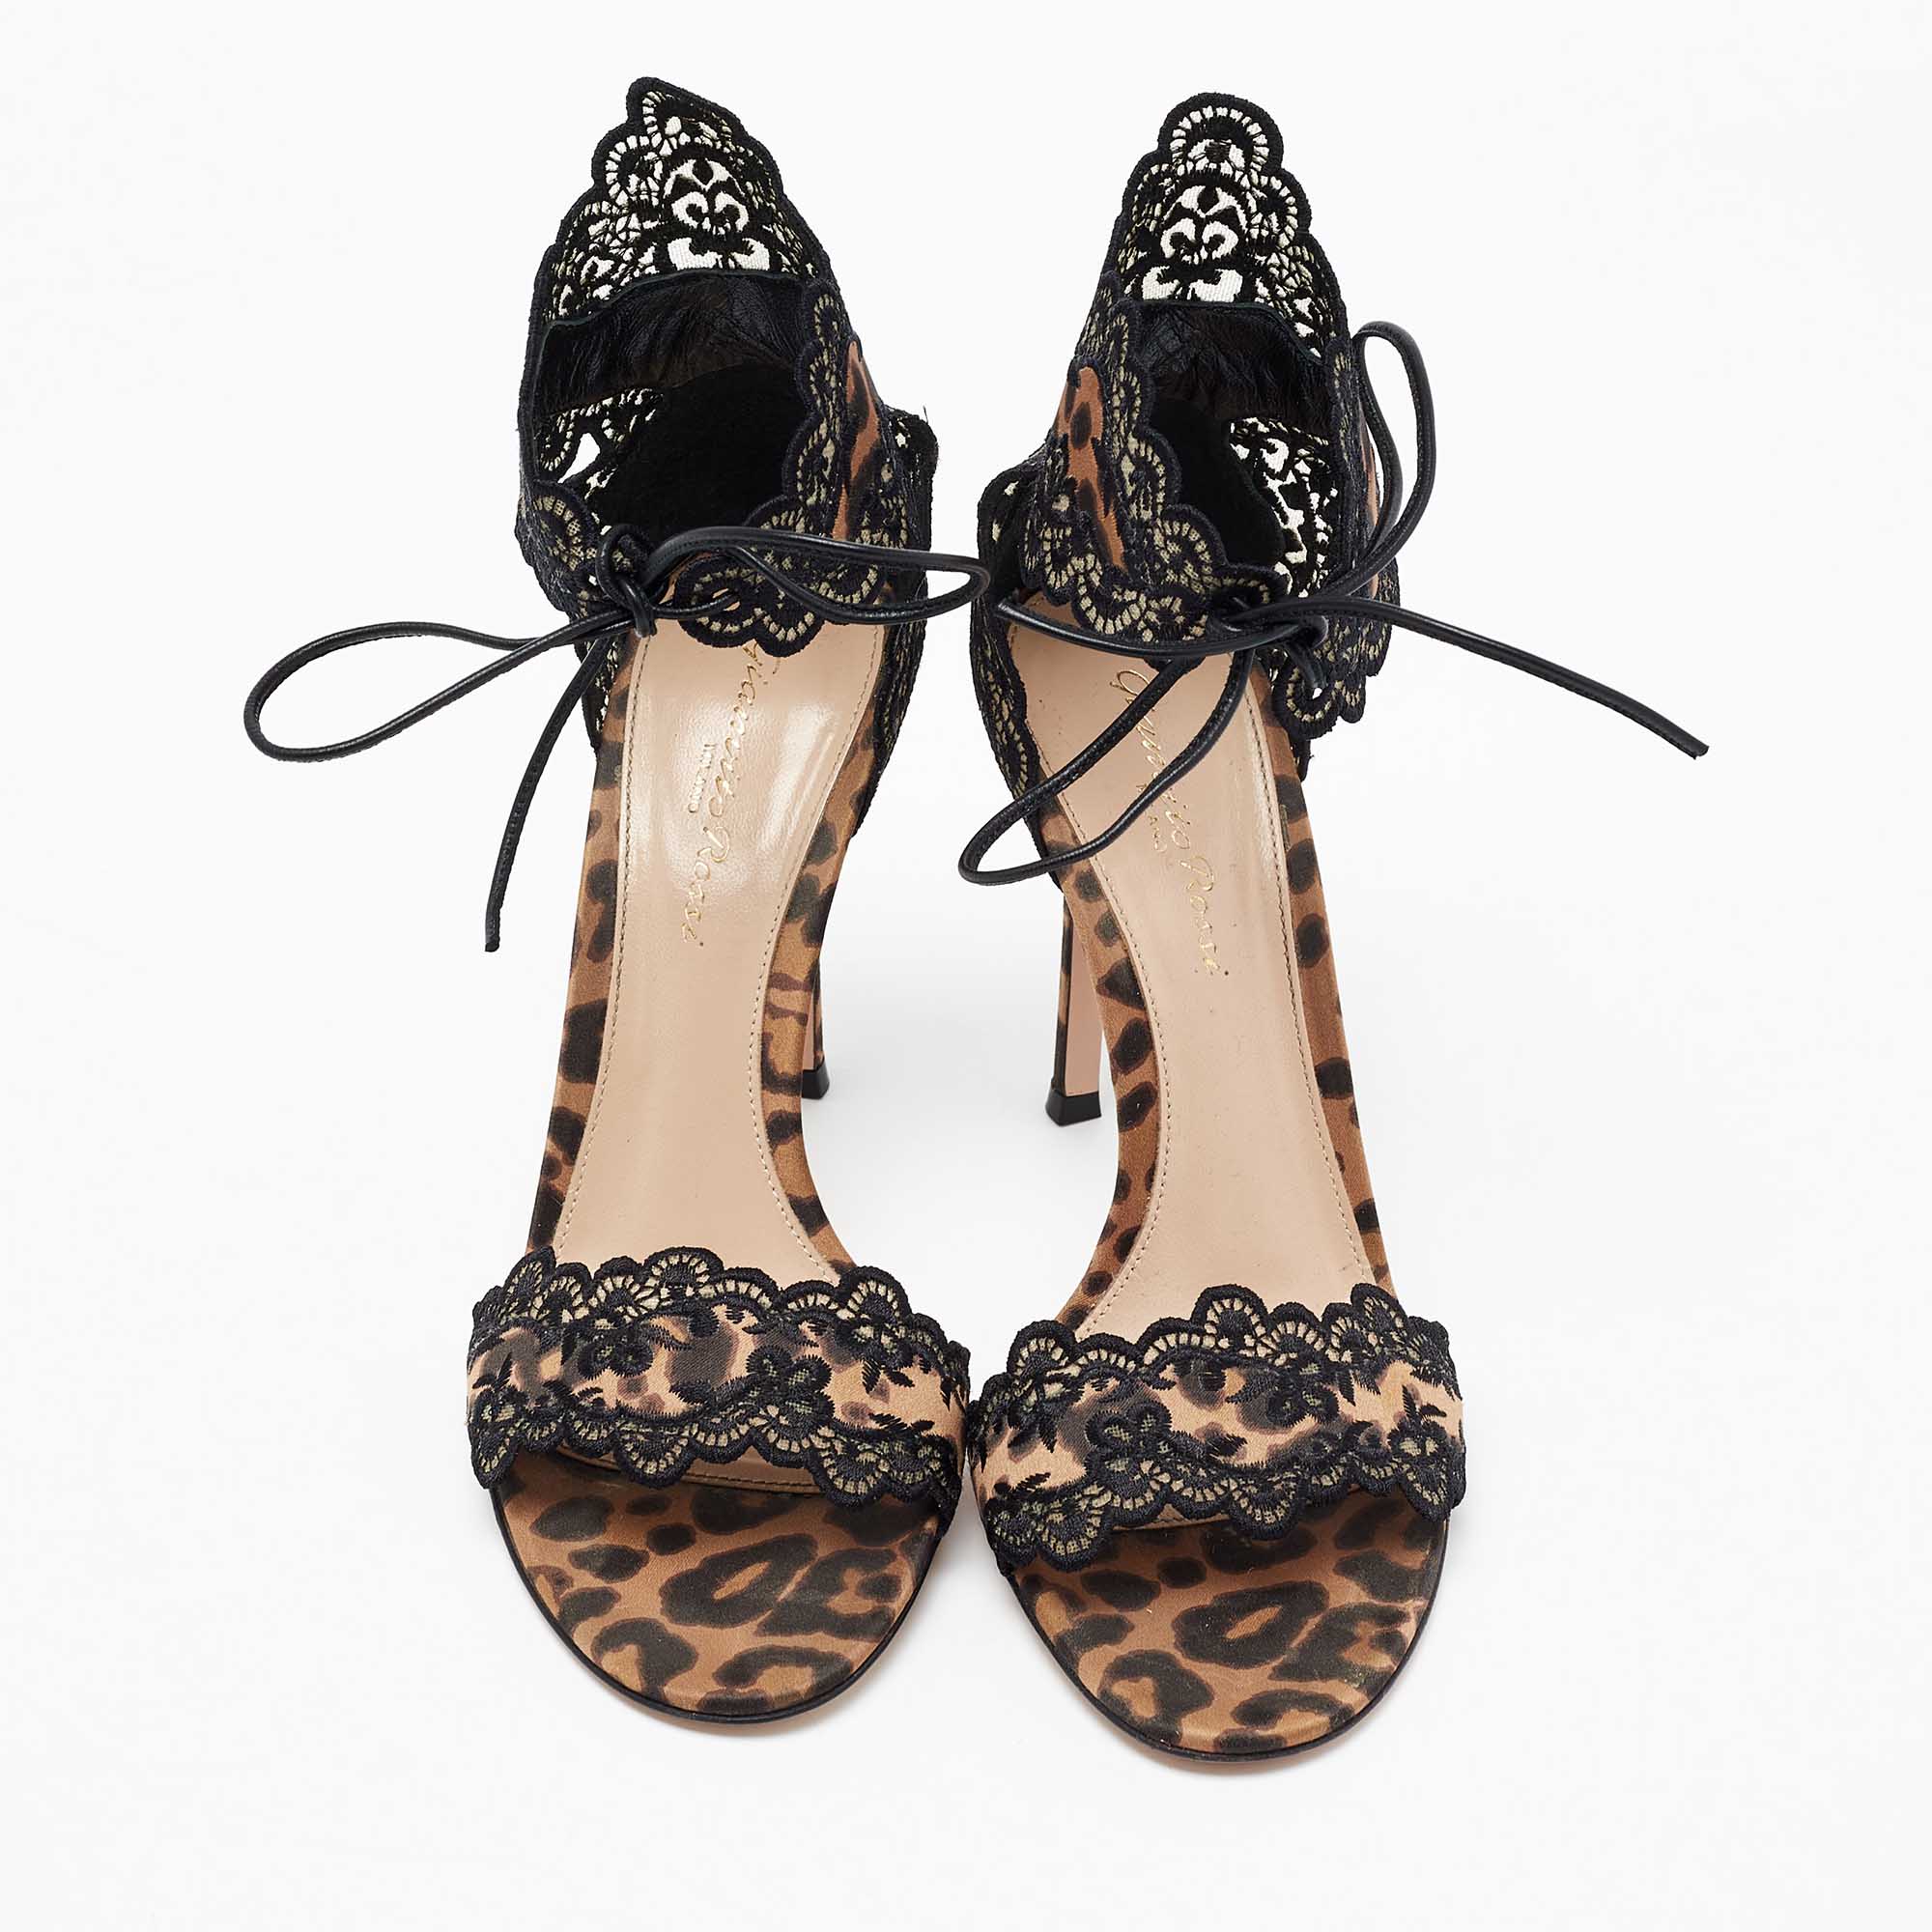 Gianvito Rossi Black/Brown Lace And Leopard Print Satin Ankle-Tie Sandals Size 36